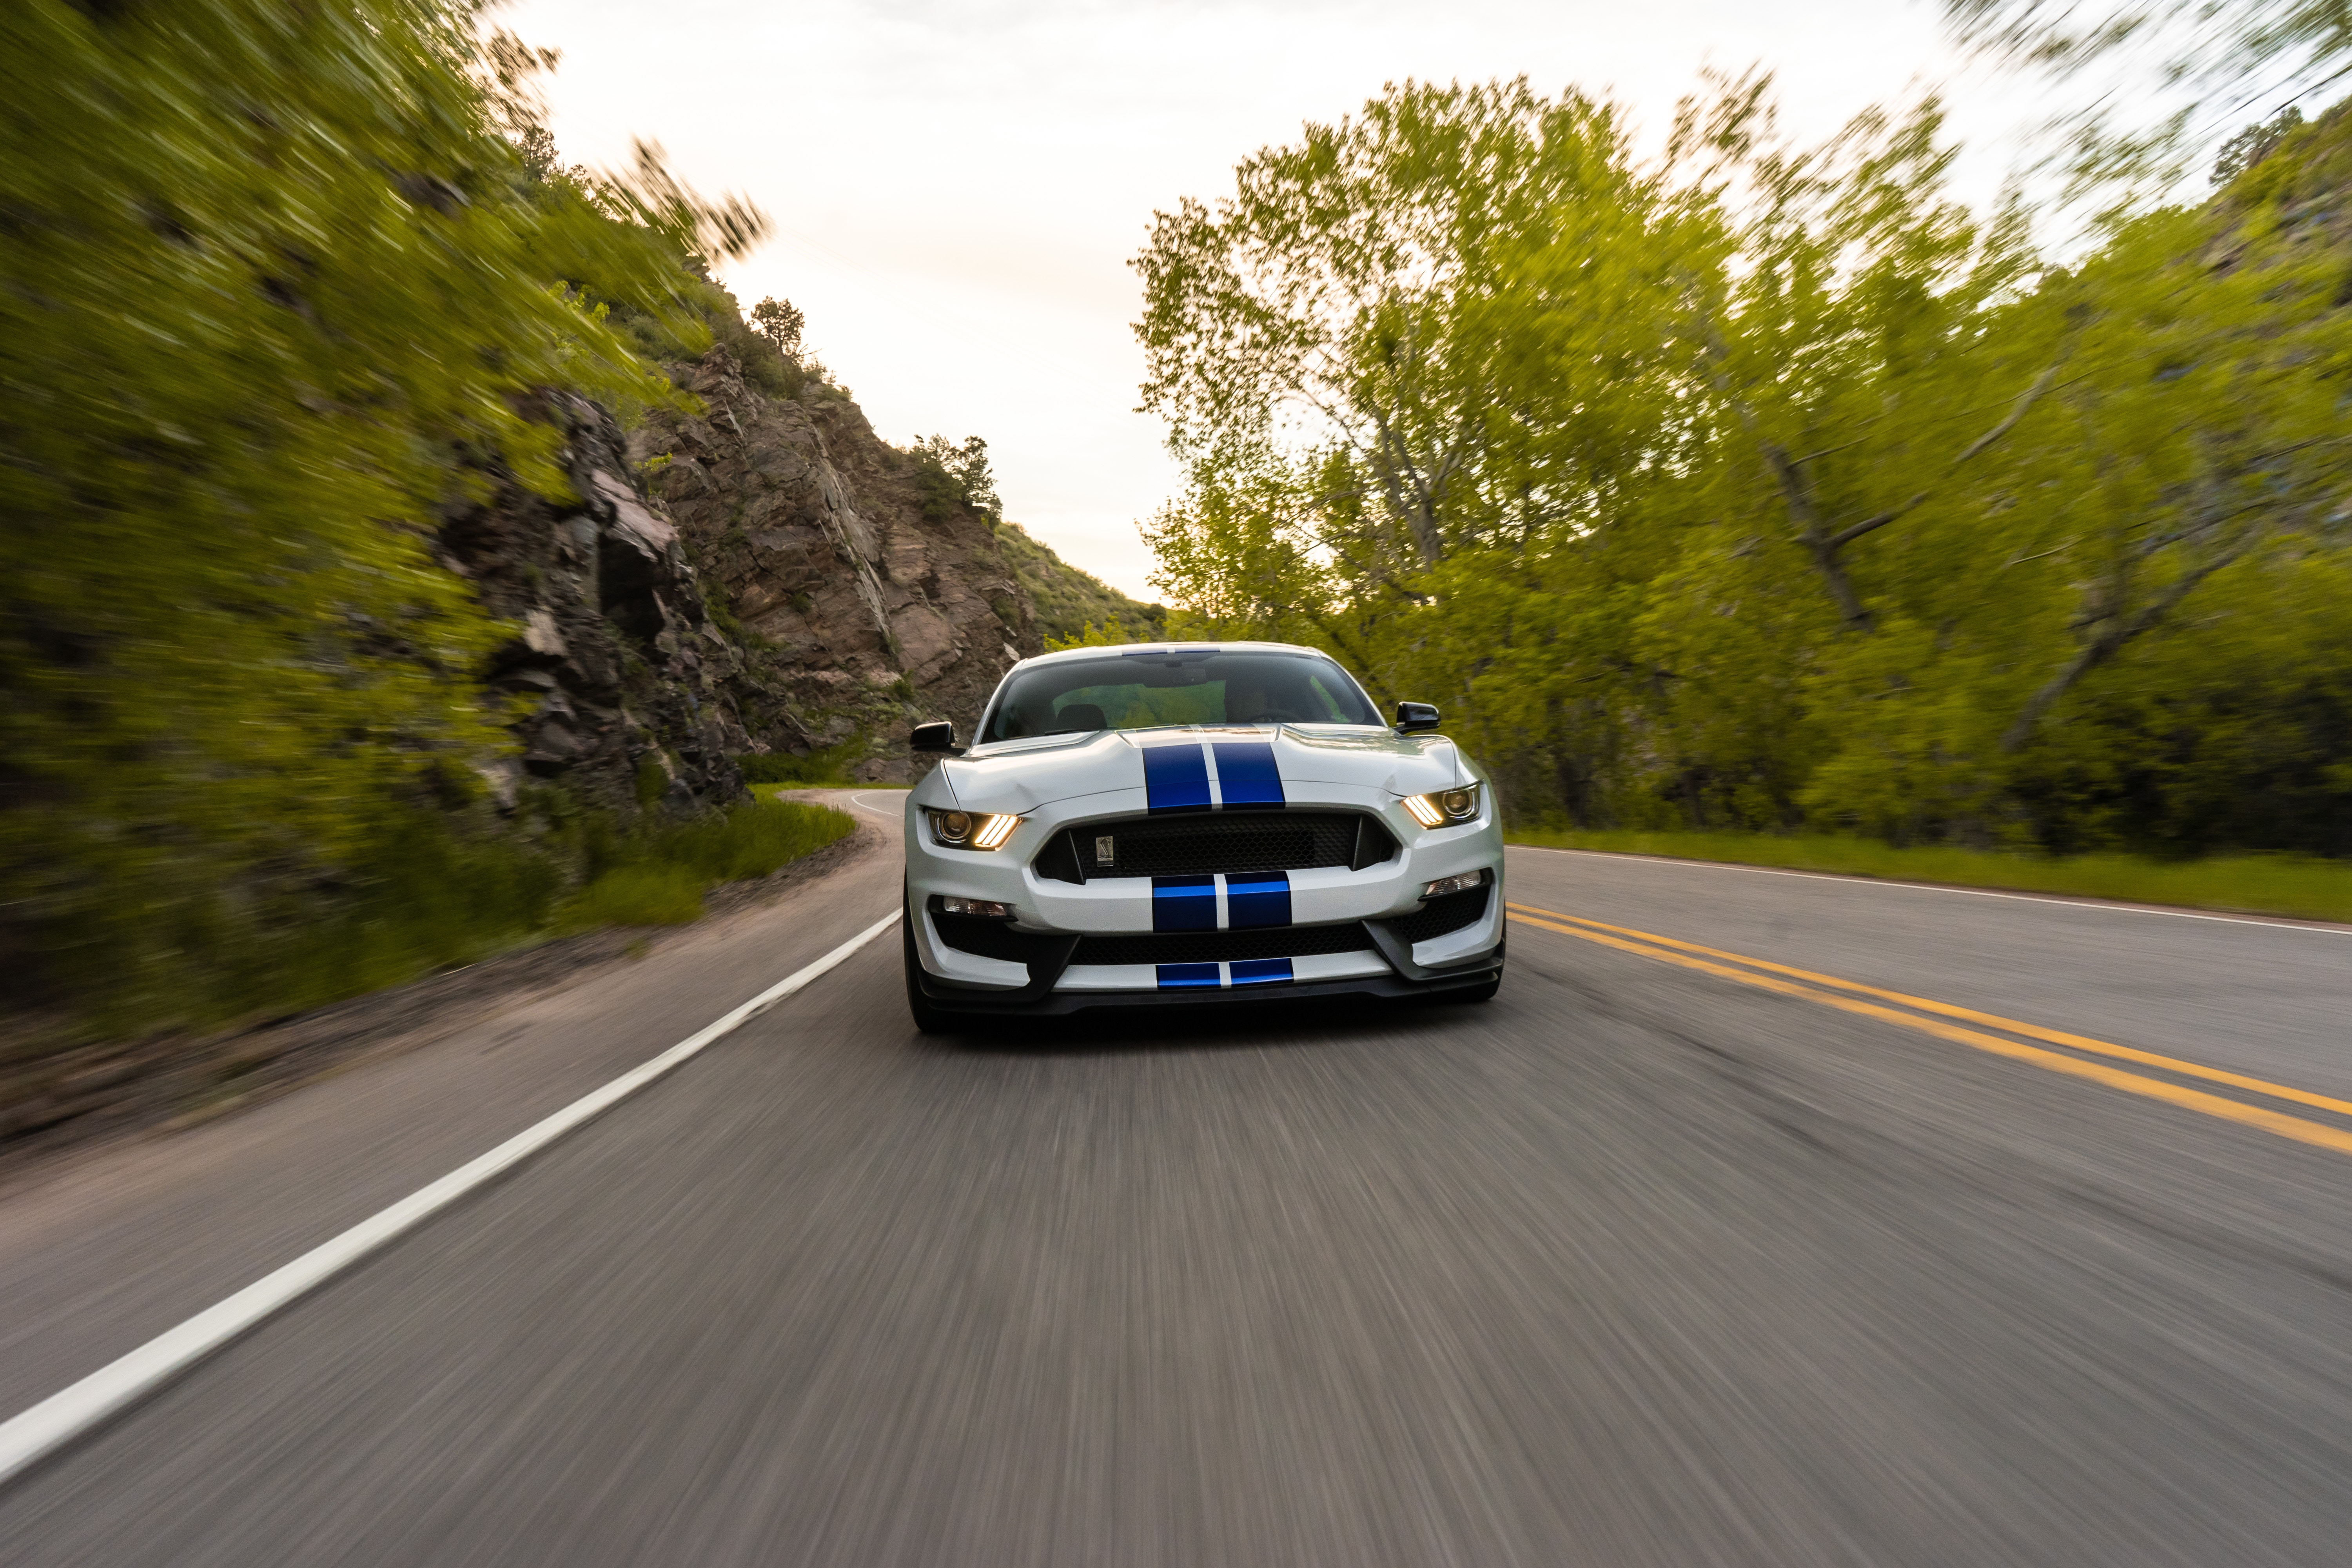 HD wallpaper cars, sports car, car, speed, ford mustang gt350, sports, ford, road, machine